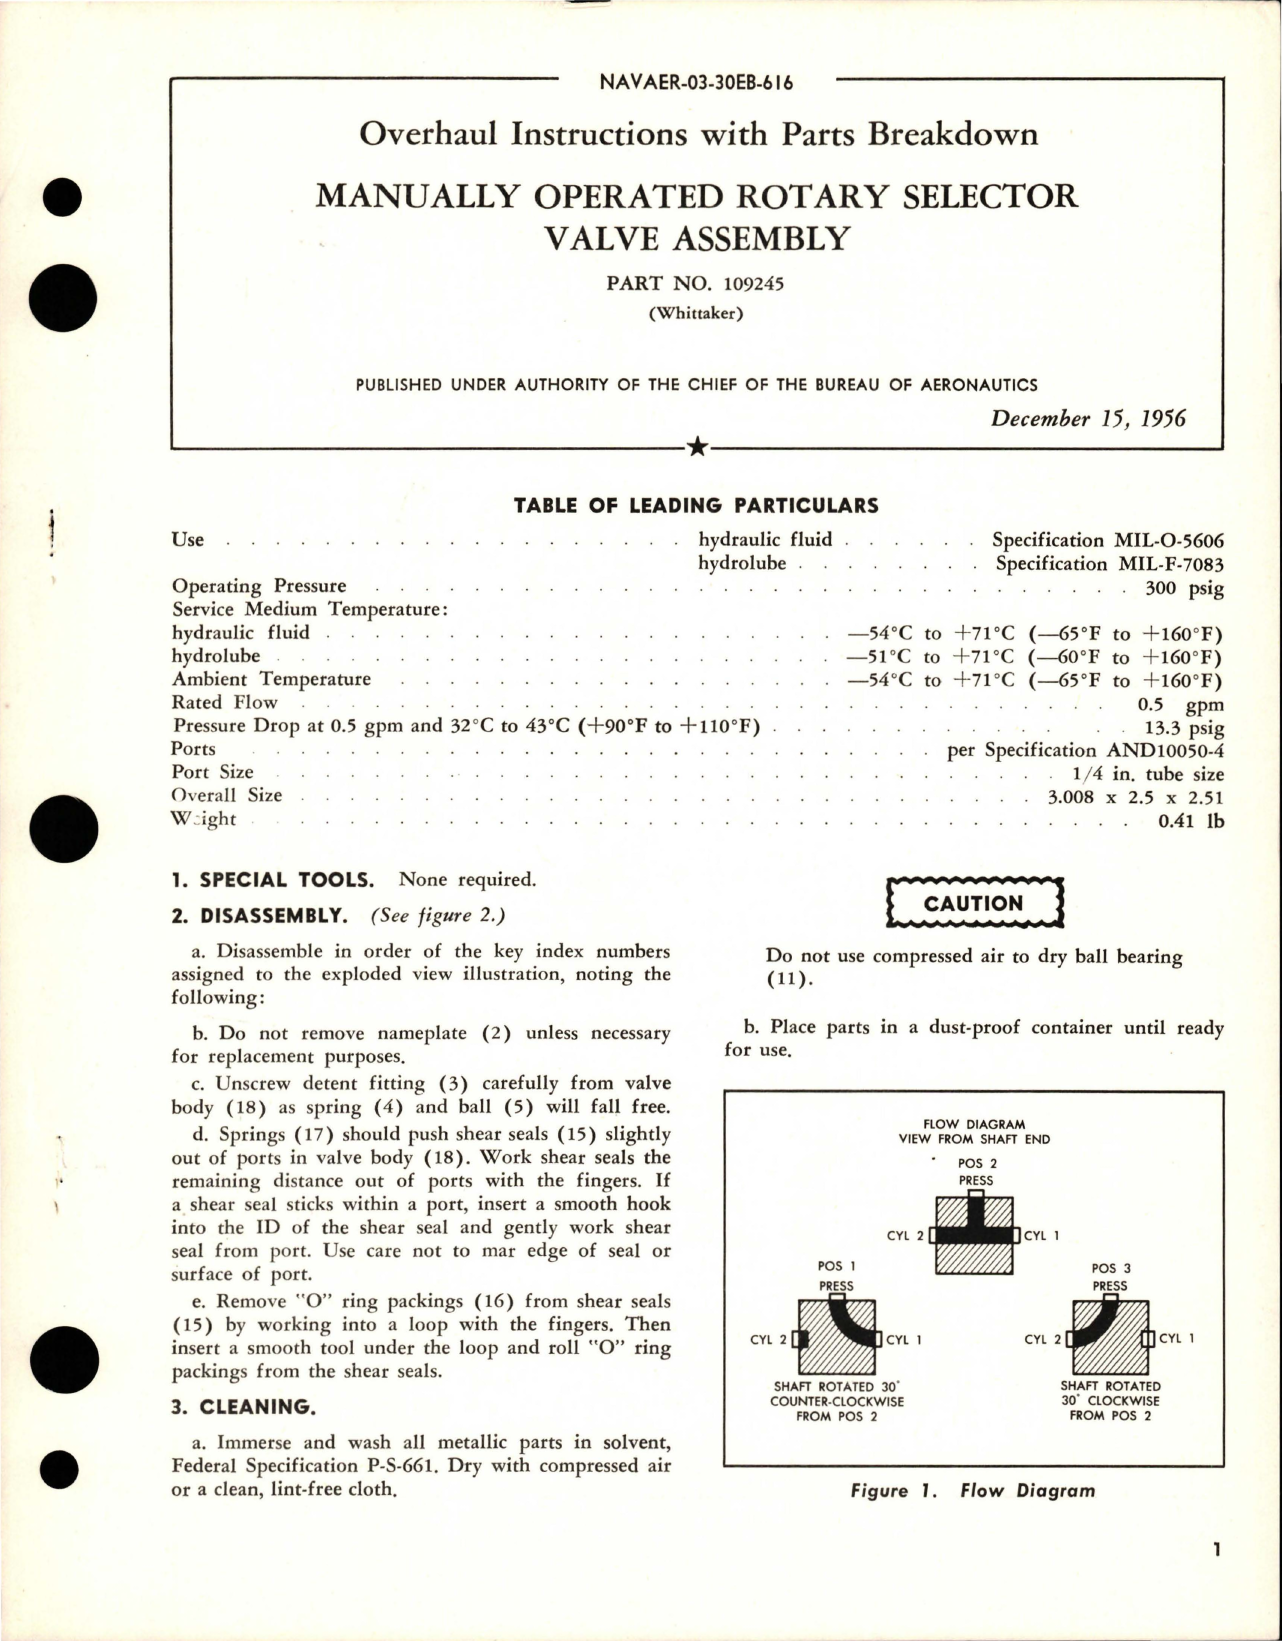 Sample page 1 from AirCorps Library document: Overhaul Instructions with Parts for Manually Operated Rotary Selector Valve Assembly - Part 109245